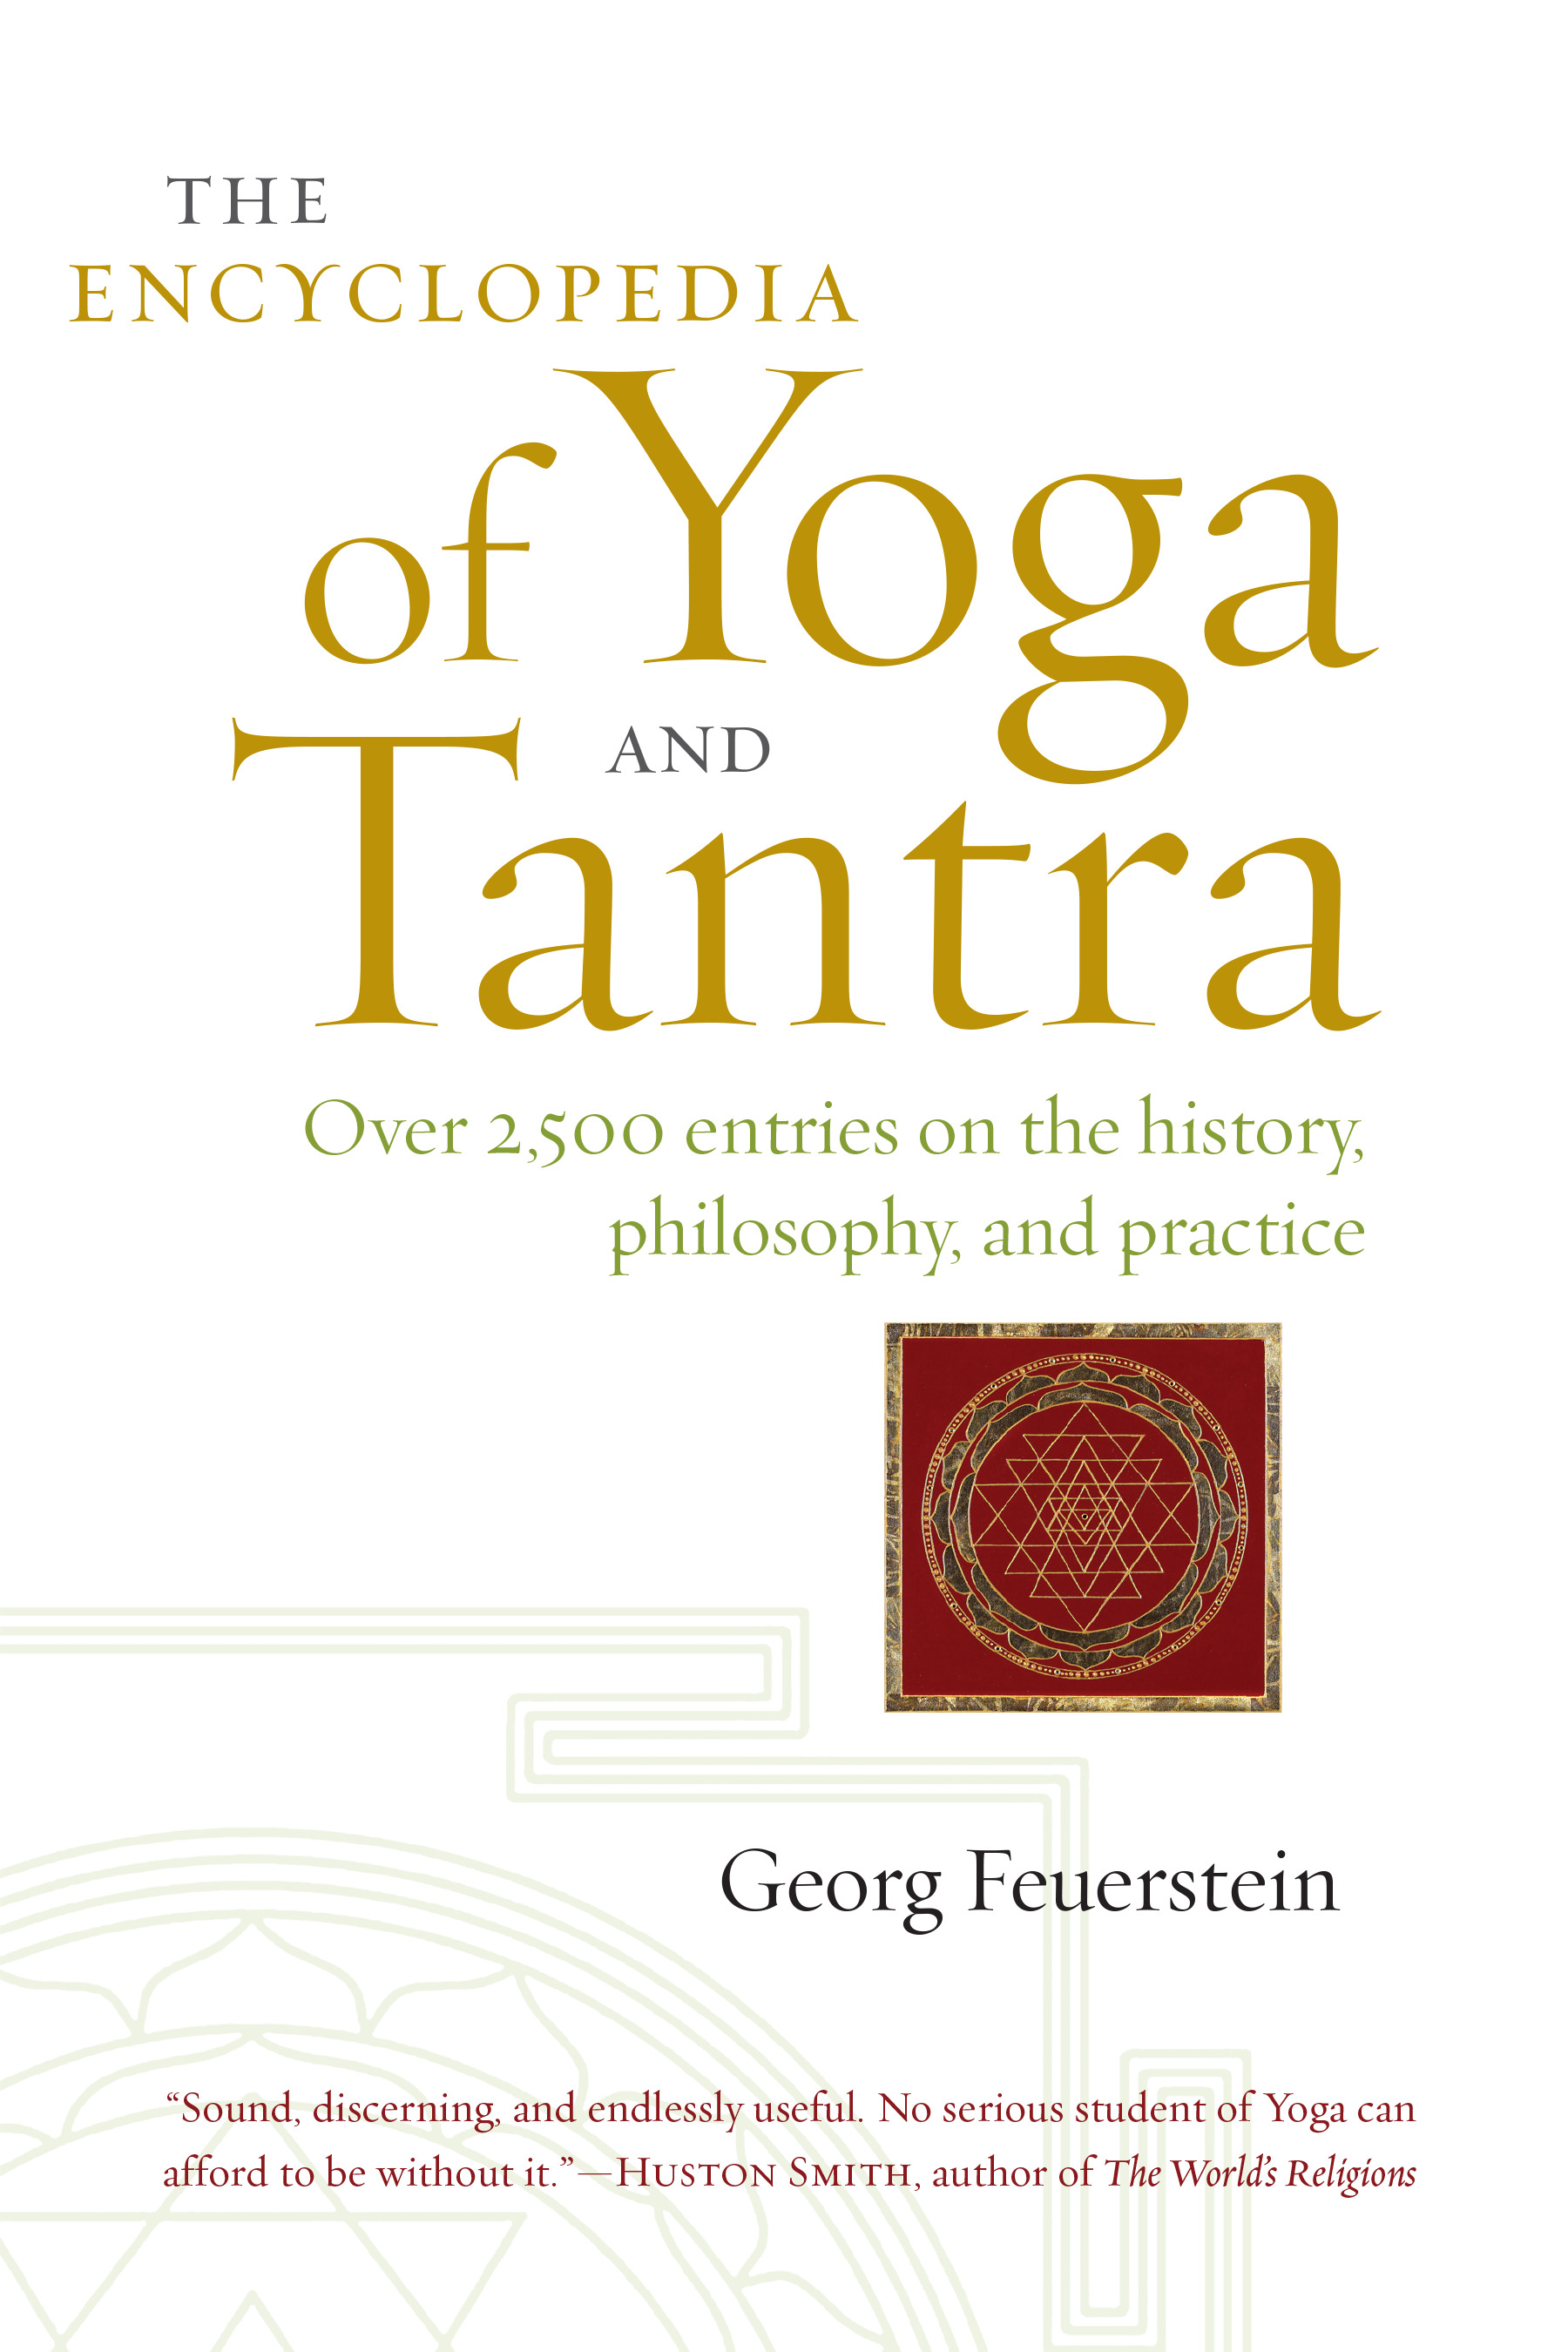 The Encyclopedia of Yoga and Tantra | Feuerstein, Georg